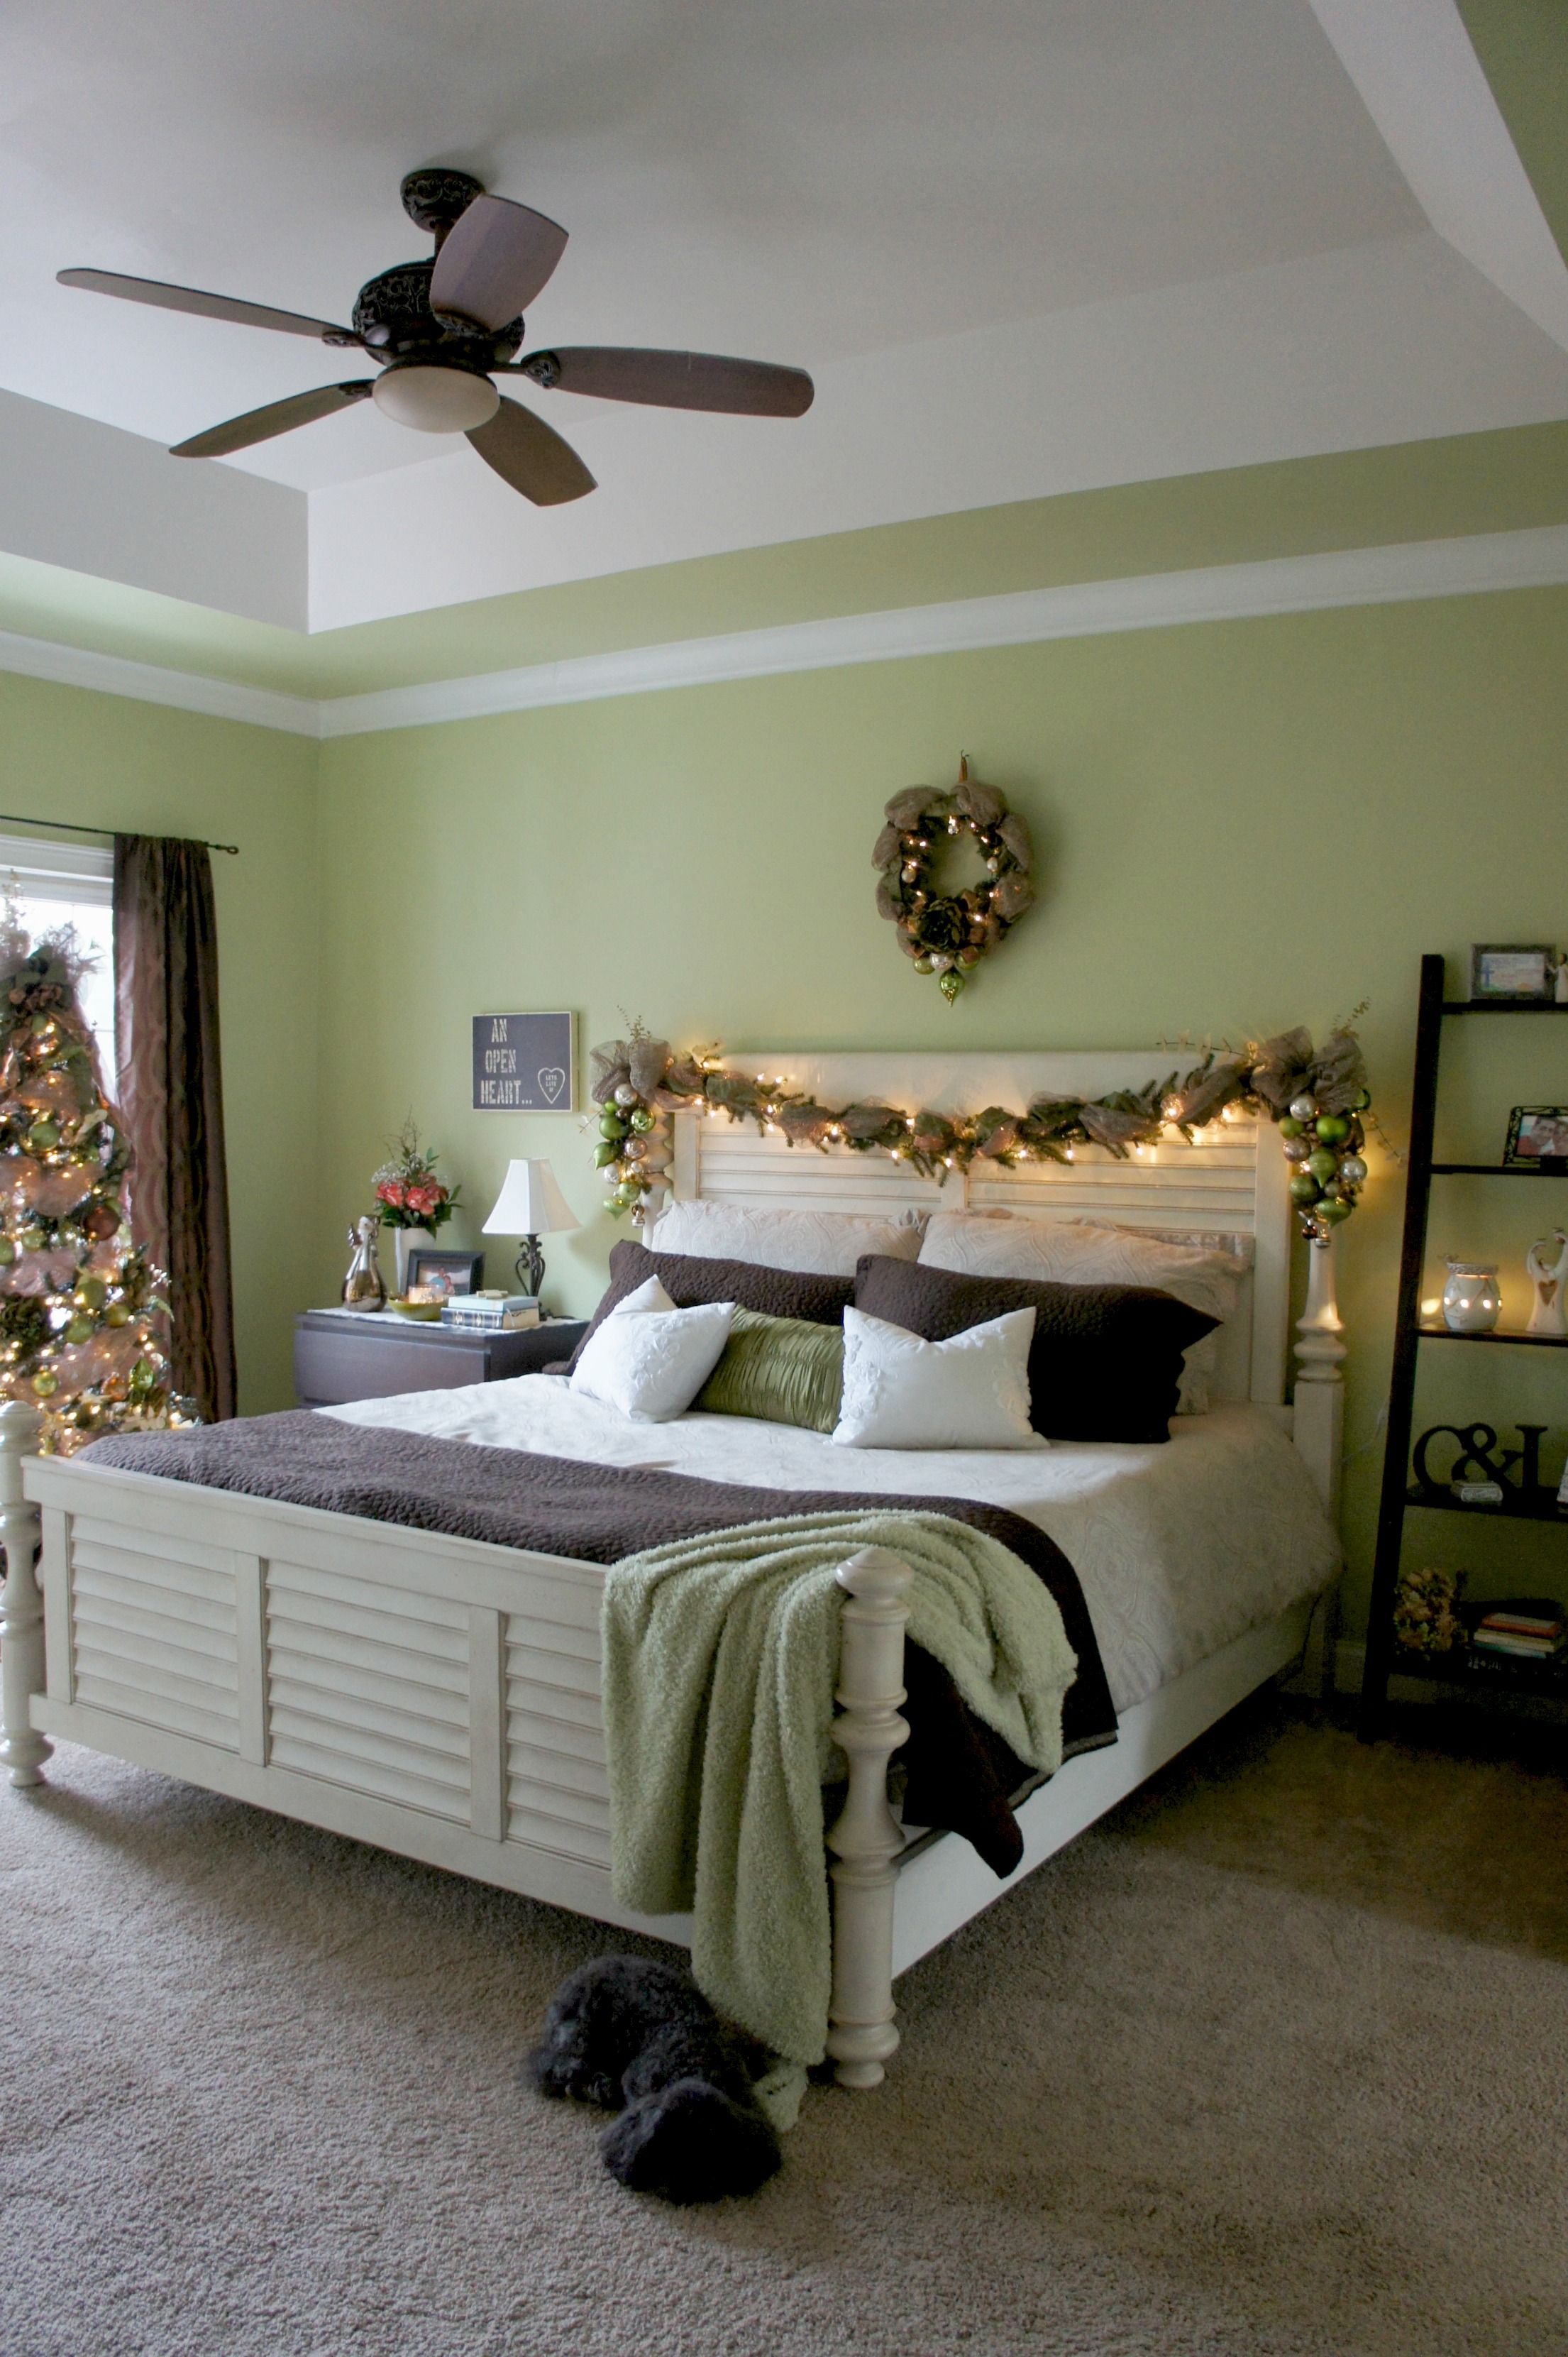 Christmas Bedroom Decorations With Lights